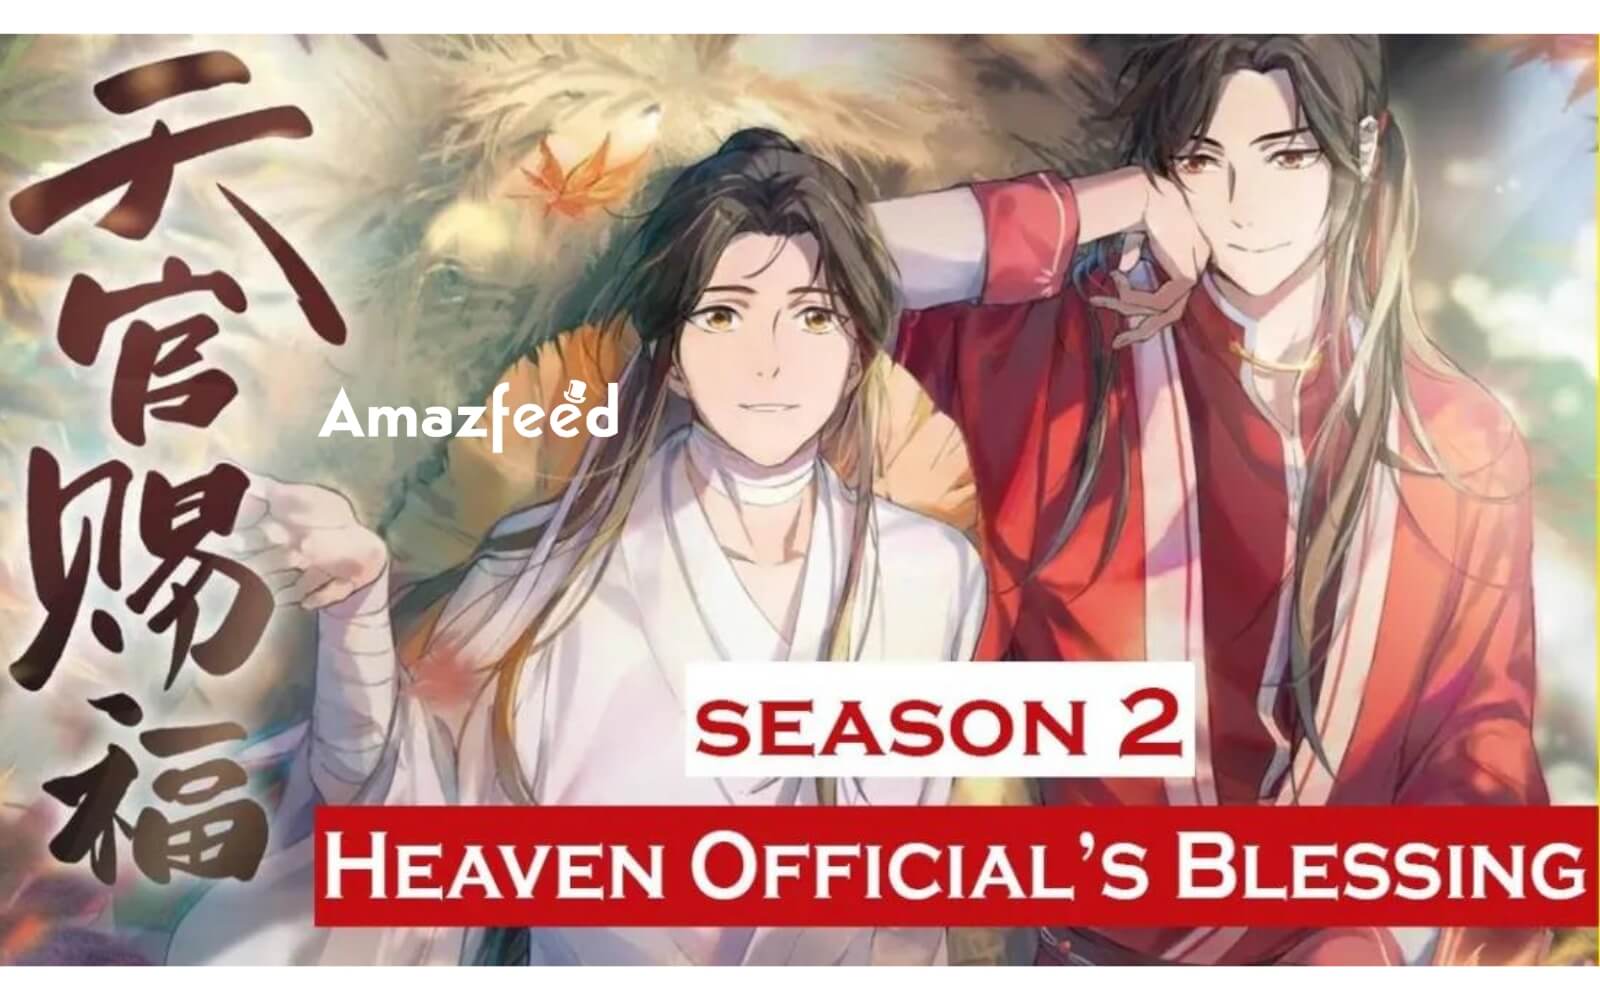 Heaven Official’s Blessing Season 2 Episode 1 Release Date